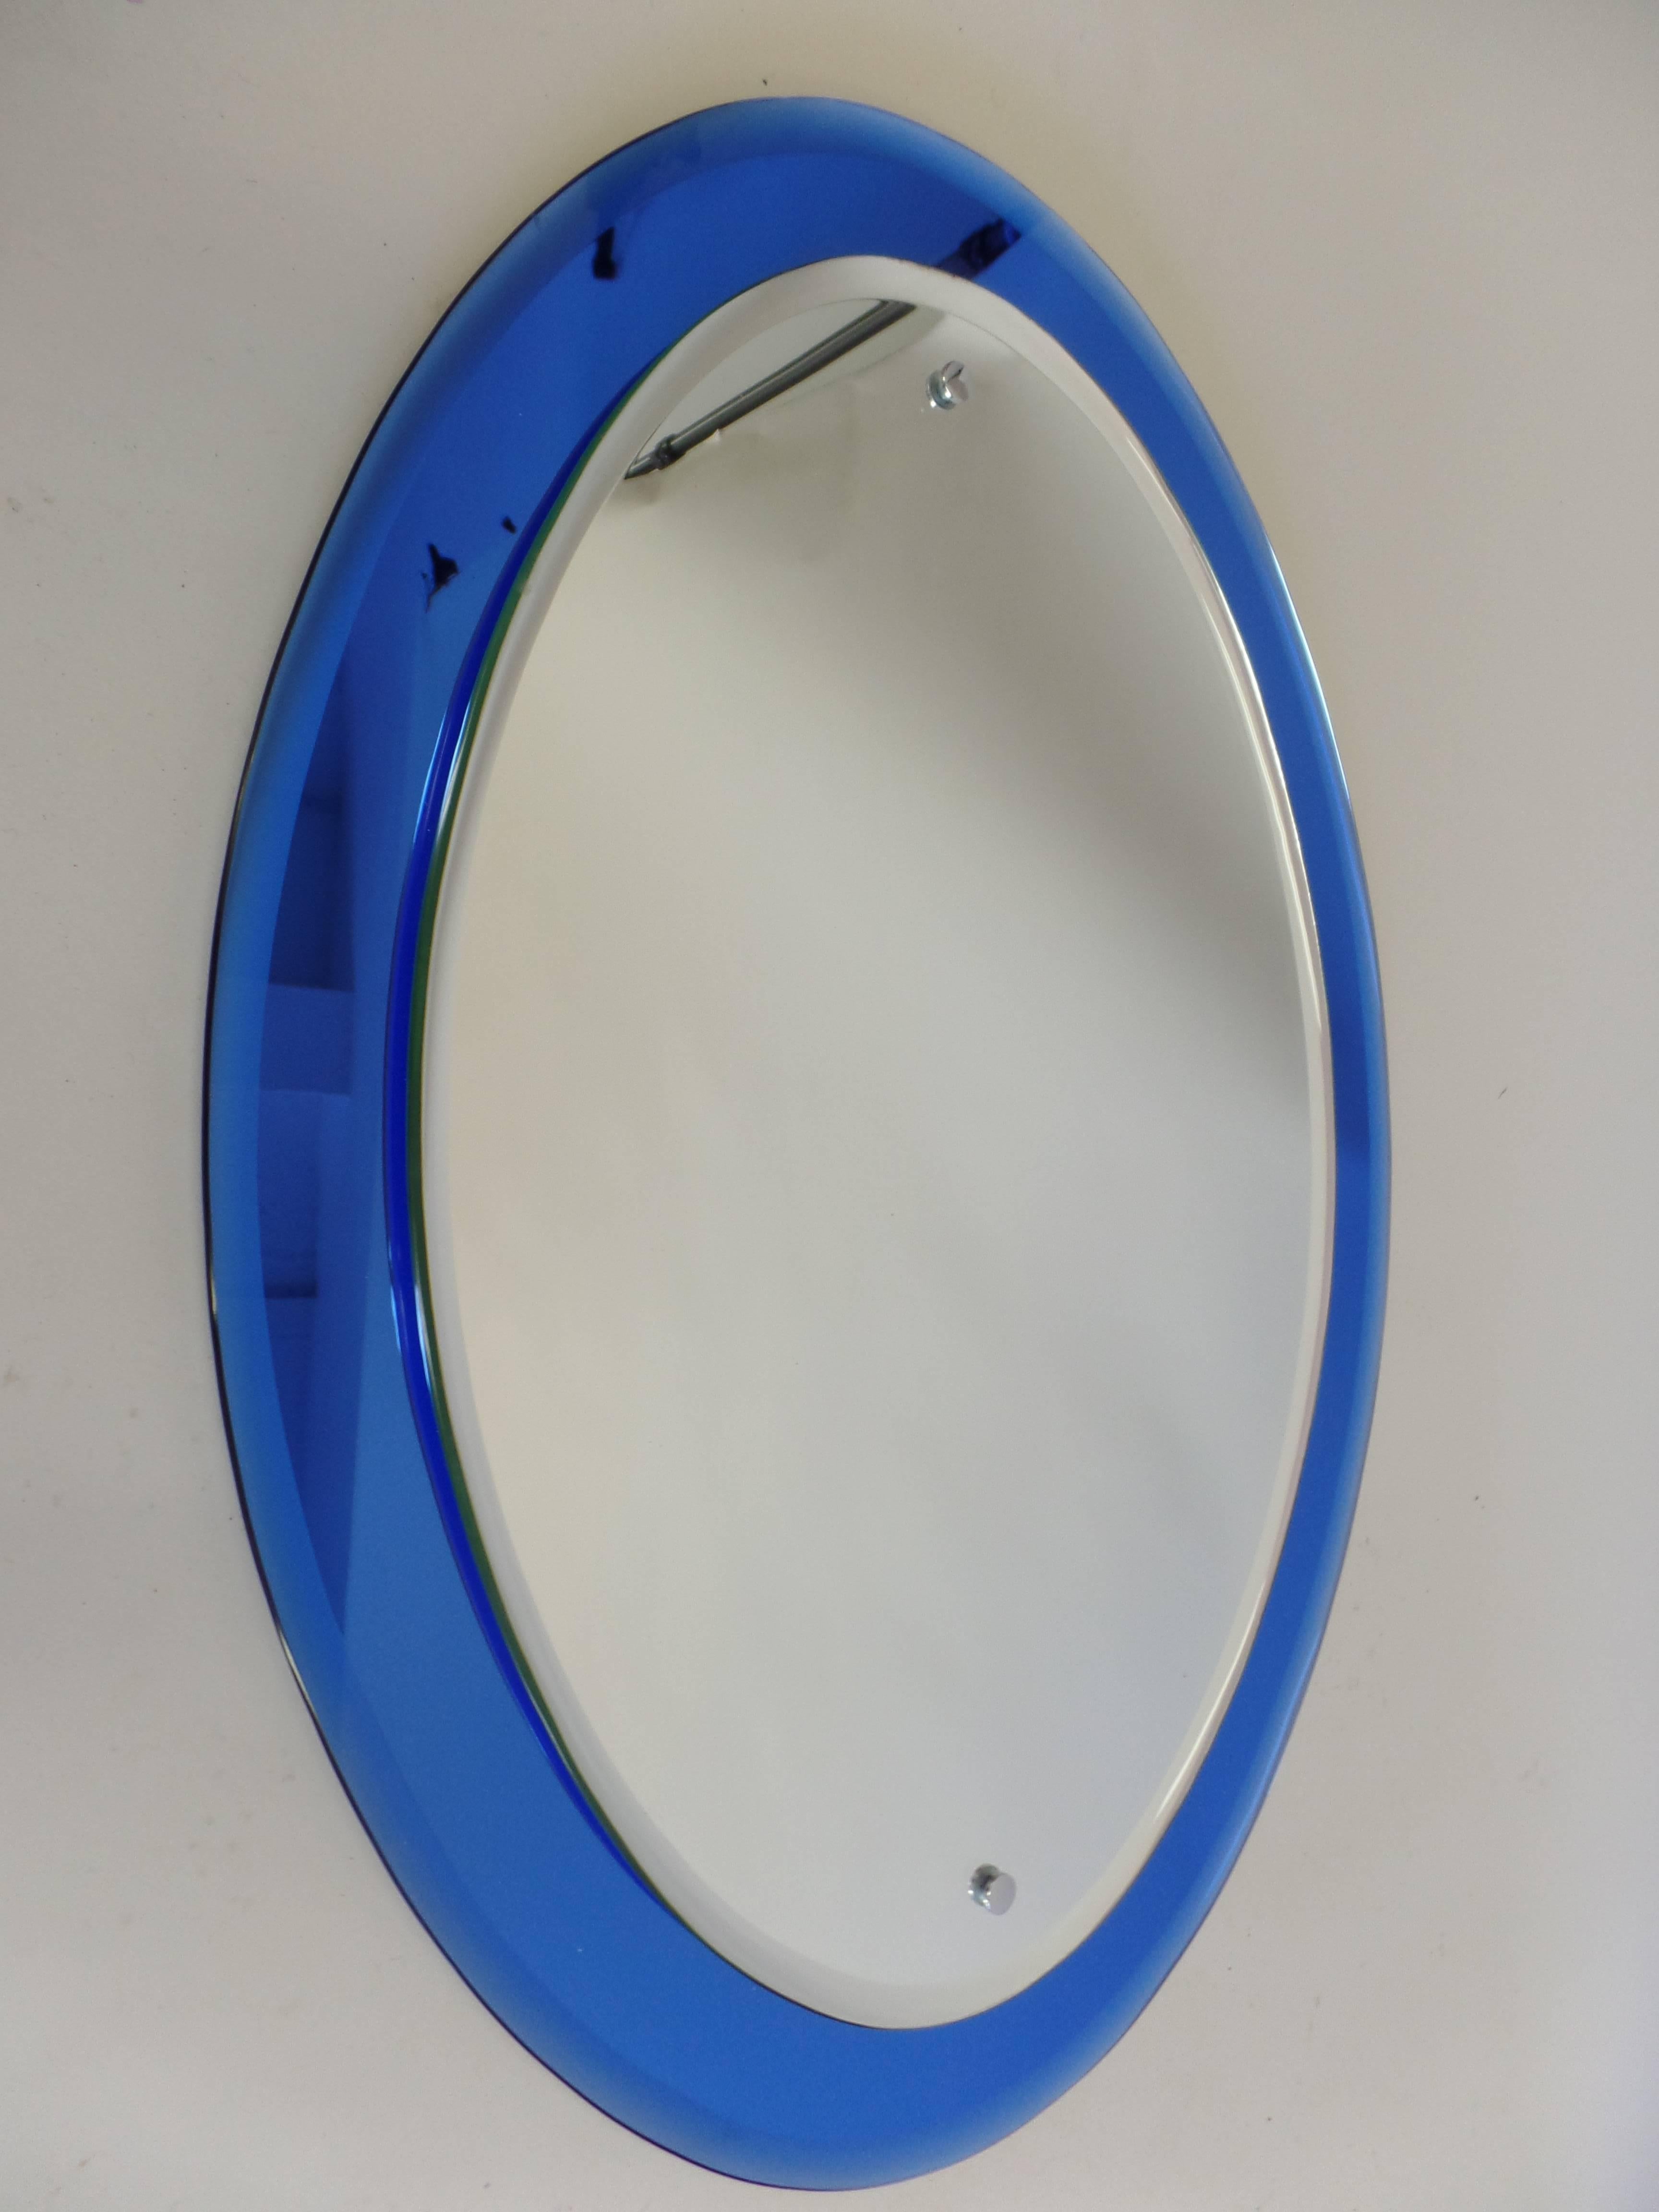 Elegant Italian Mid-Century Modern mirror in the style of Max Ingrand for Fontana Arte with a luminescent blue mirrored frame in an oval form.